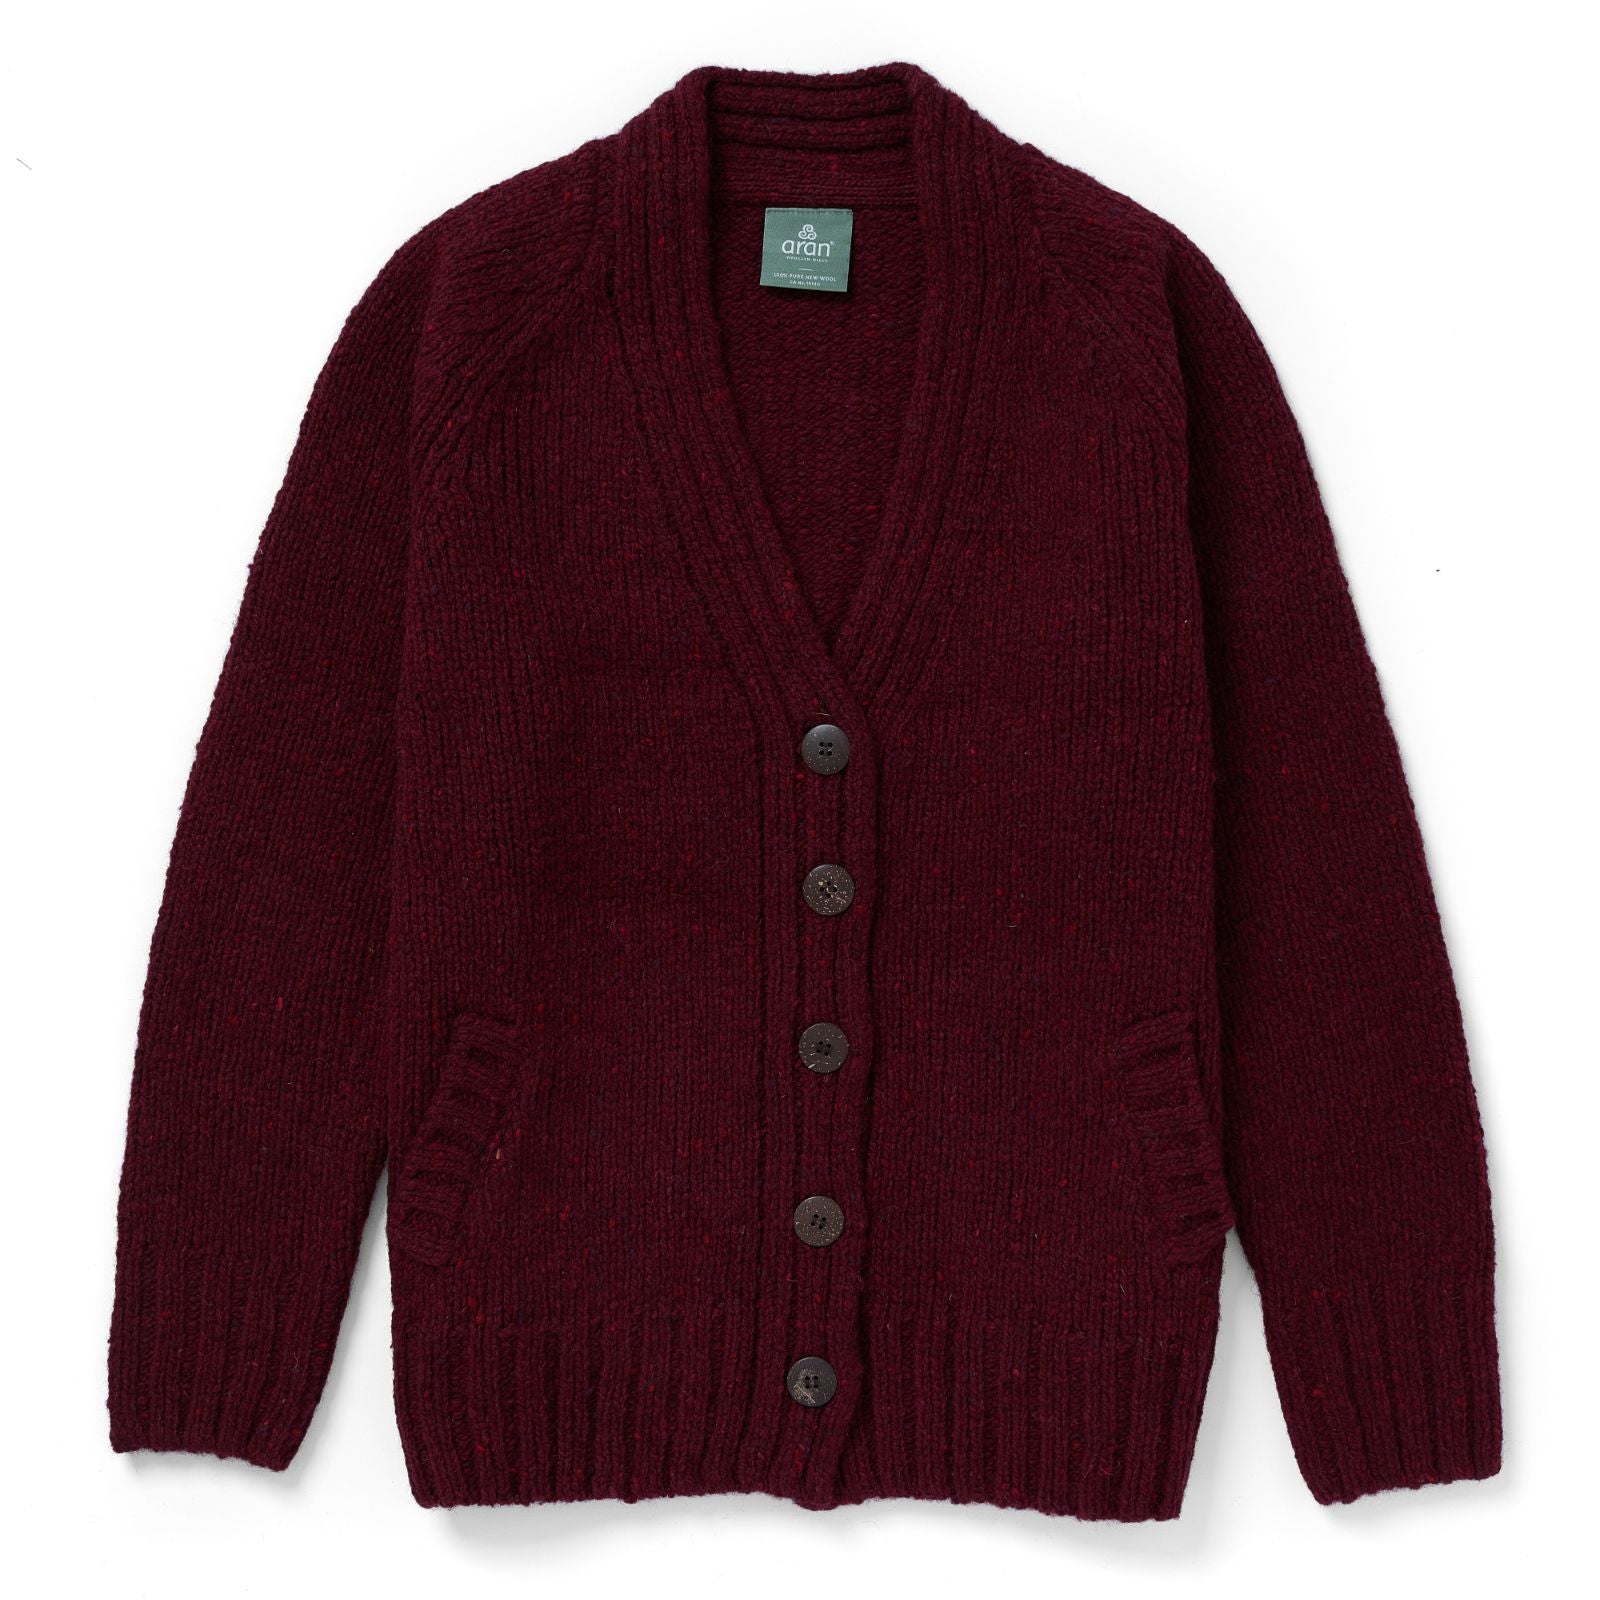 Ladies' Donegal Cardigan with Side Pockets - Winter Berry